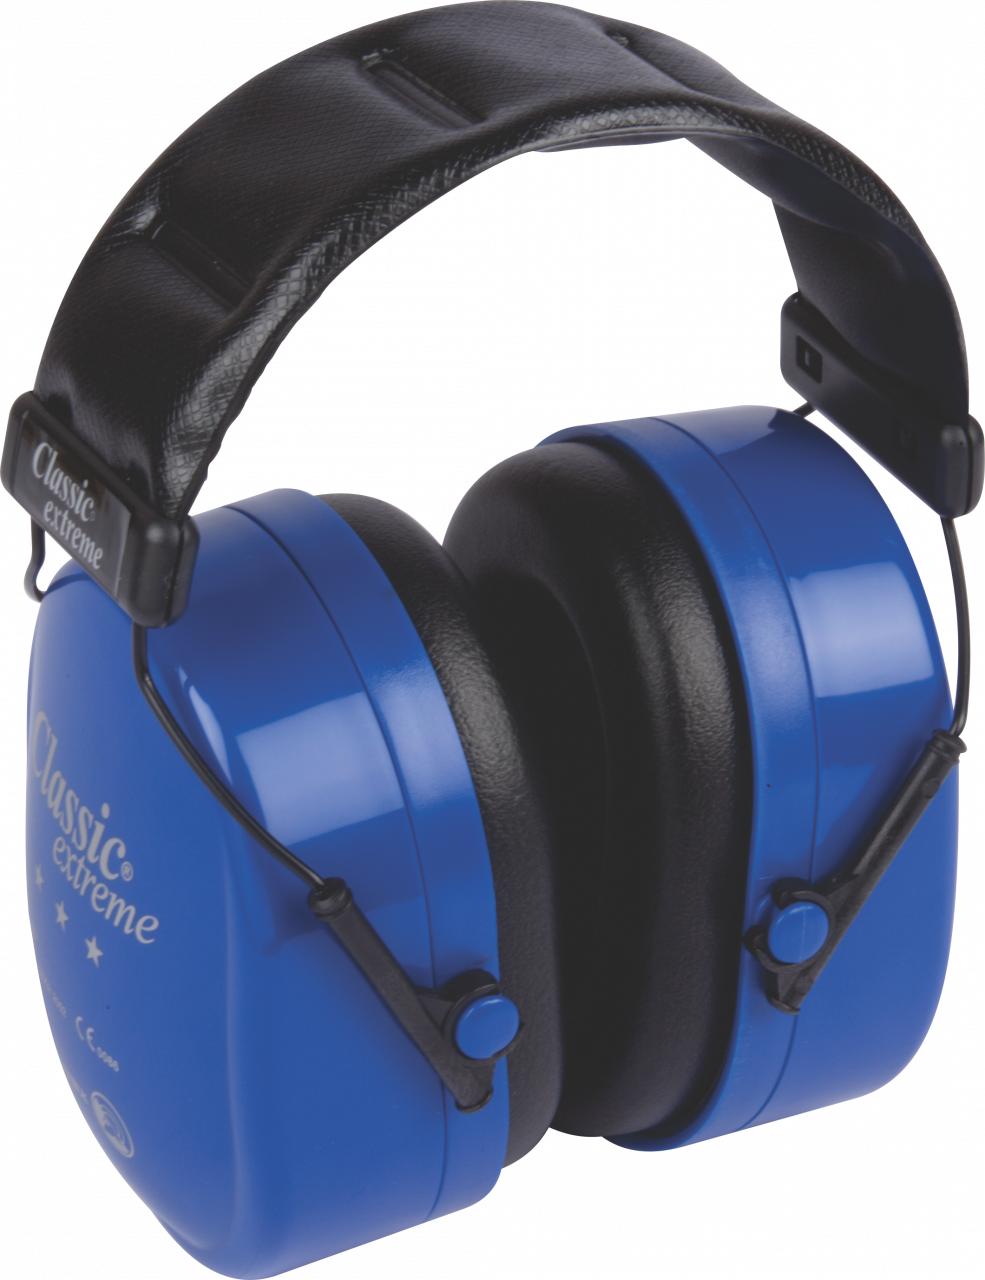 Ear Muff Laser Comfort Ce Approved